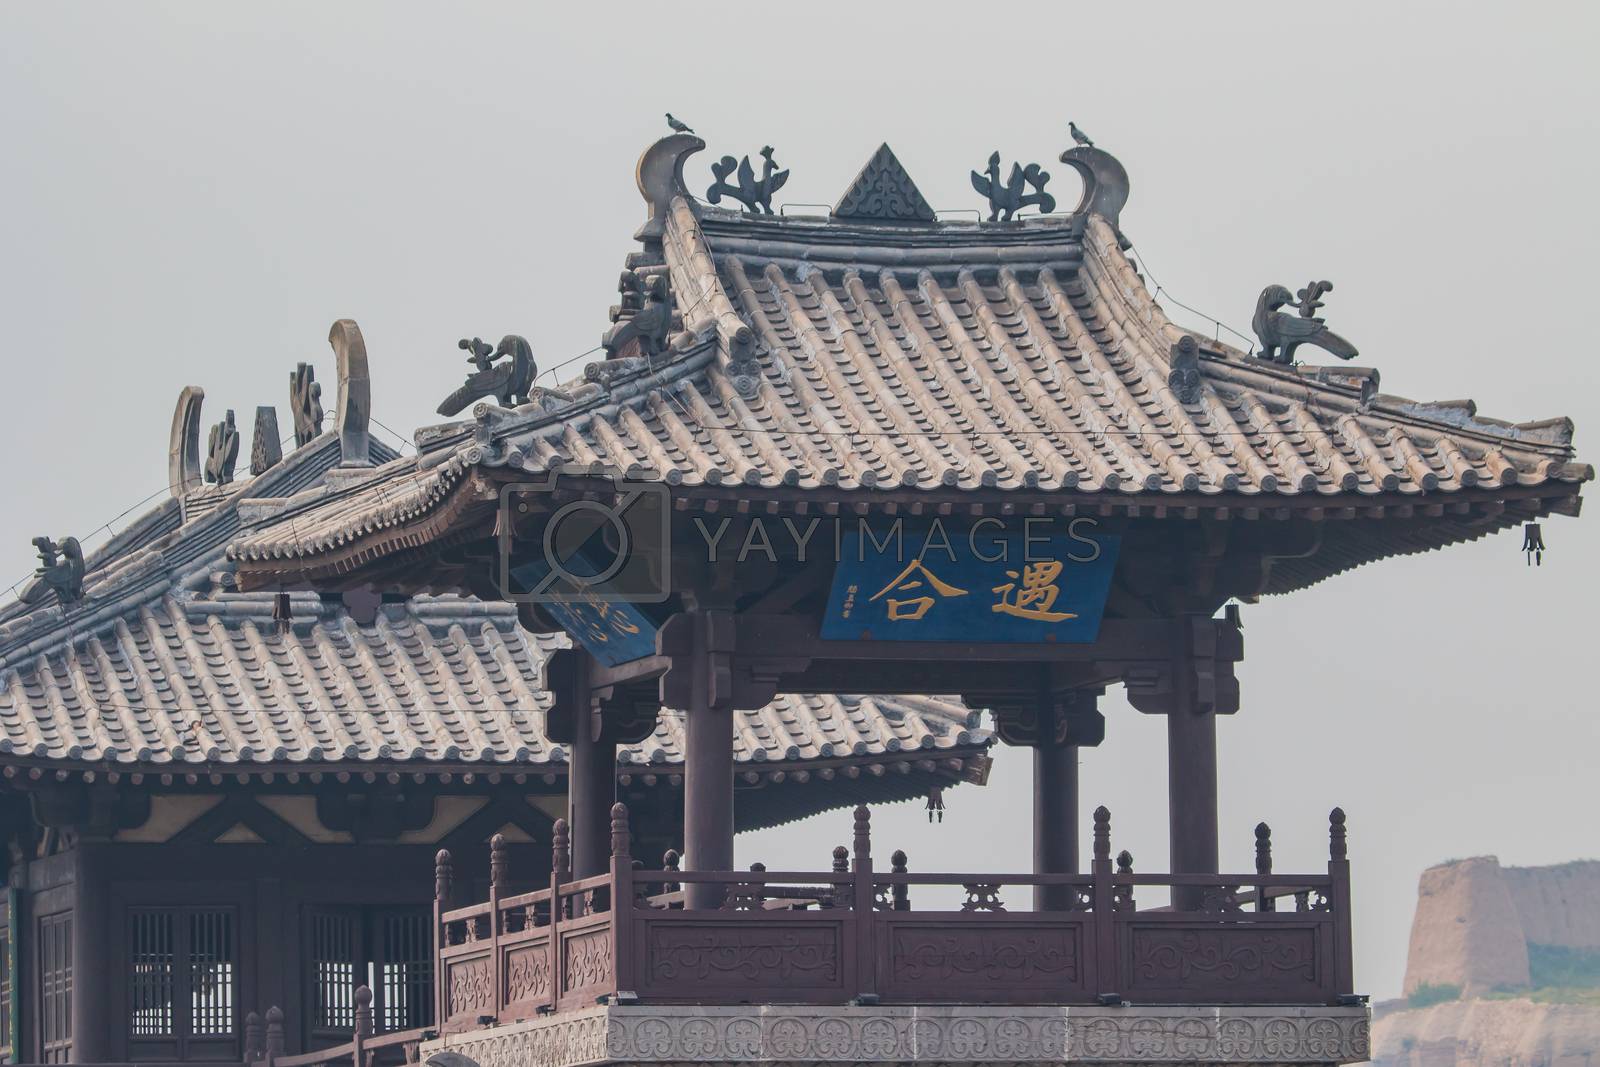 Royalty free image of Ming Dynasty look out tower by Webitect